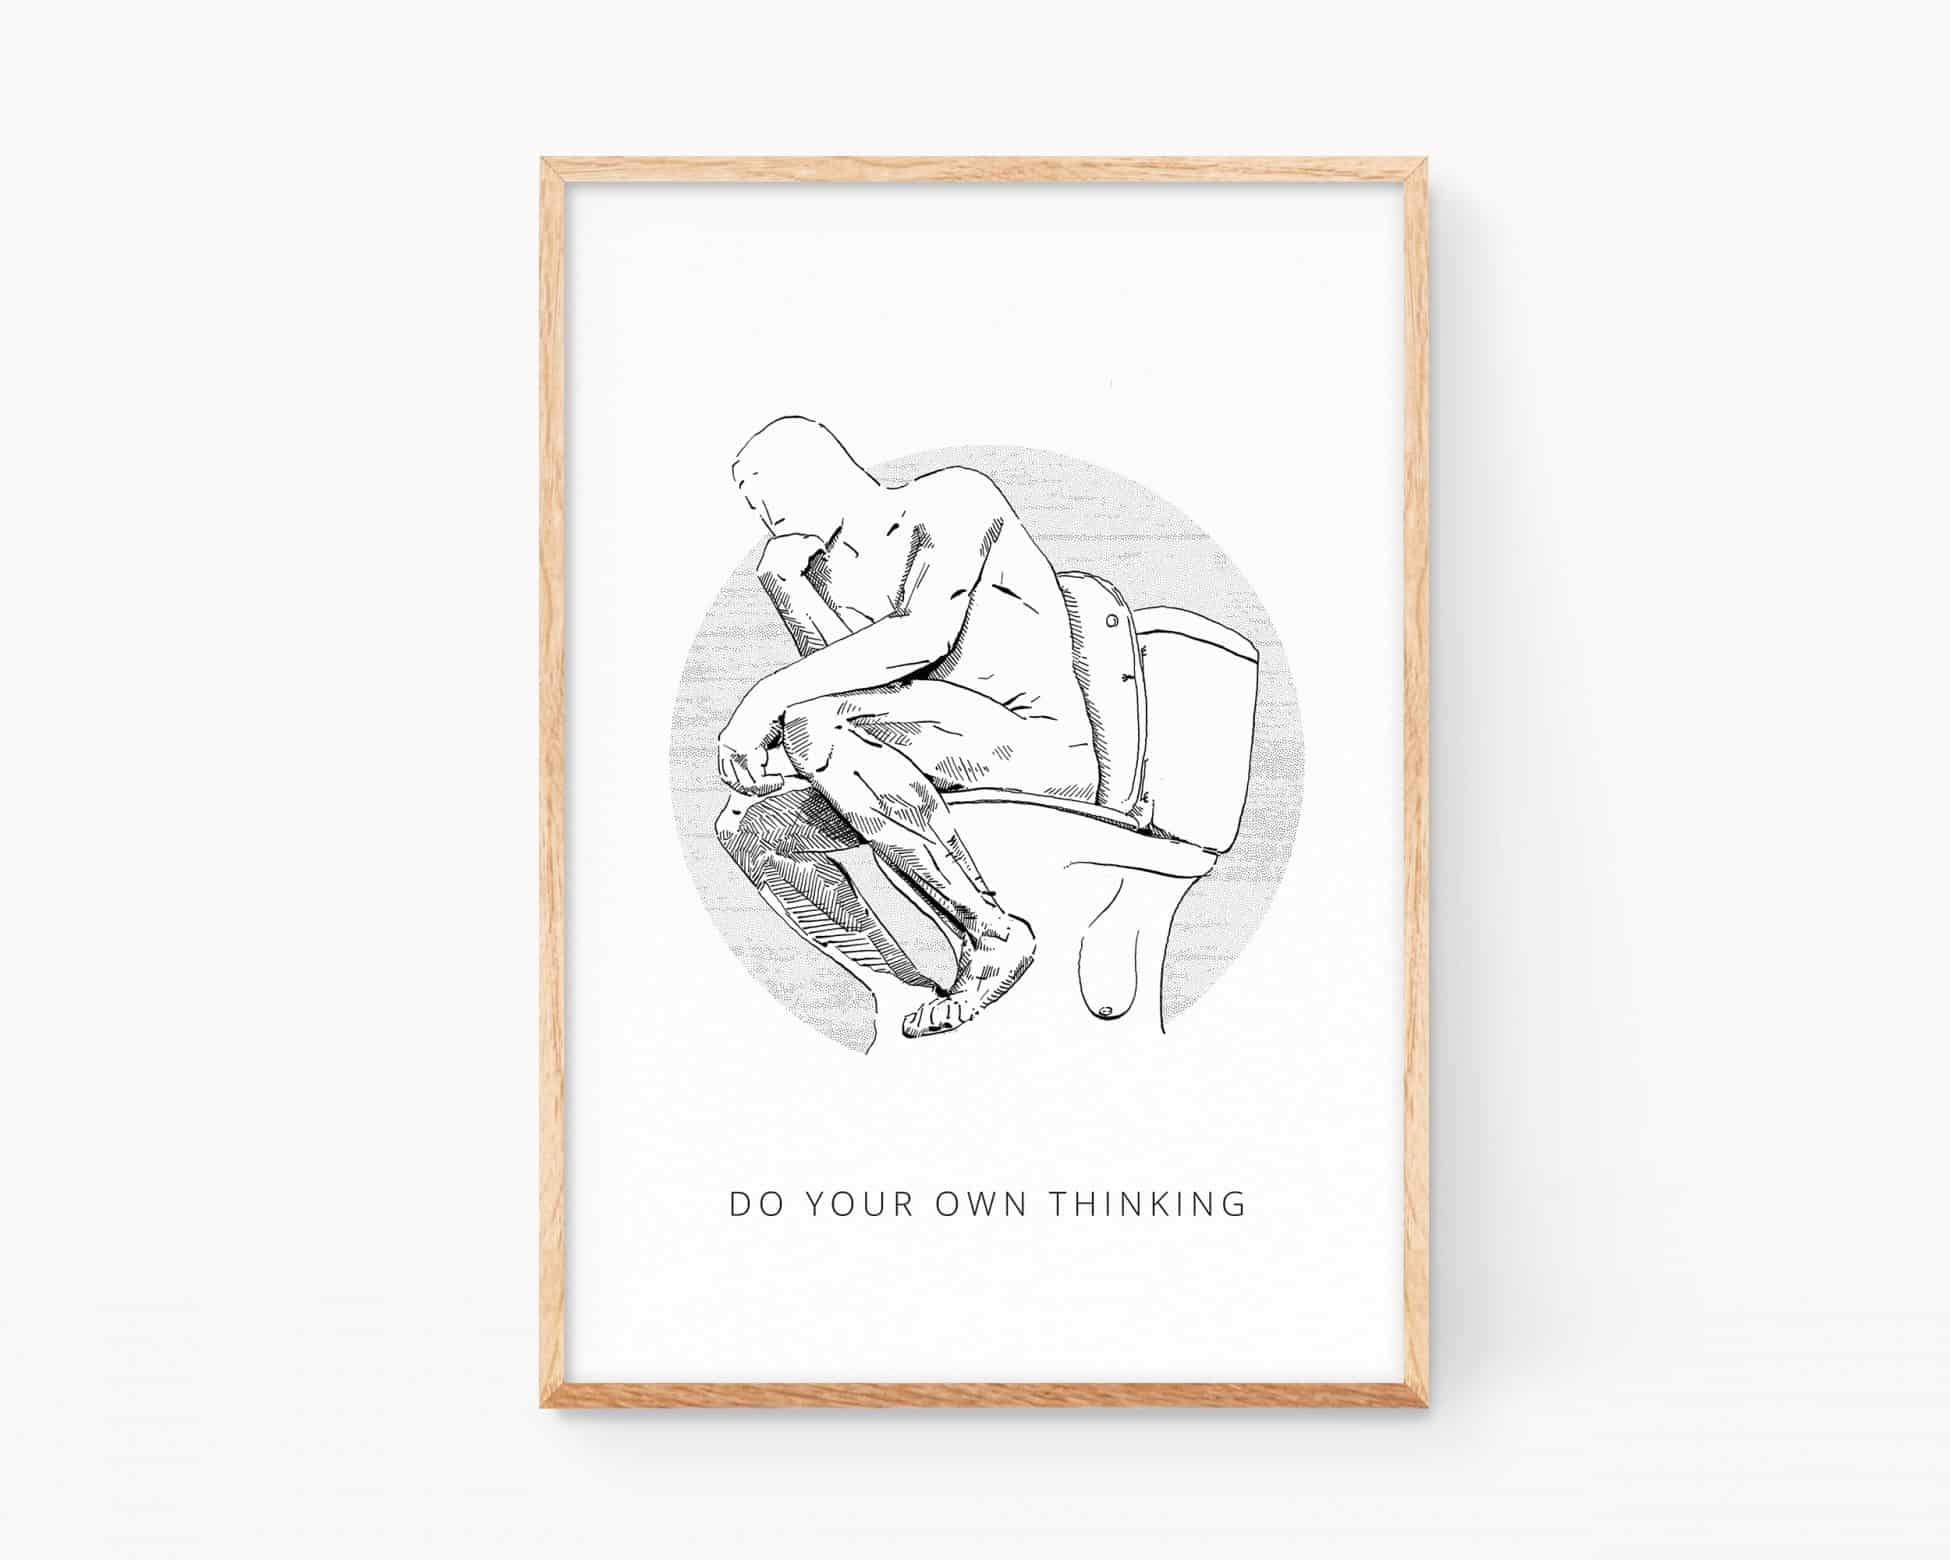 The thinker by Rodin, black and white illustration print. Funny poster for bathrooms.